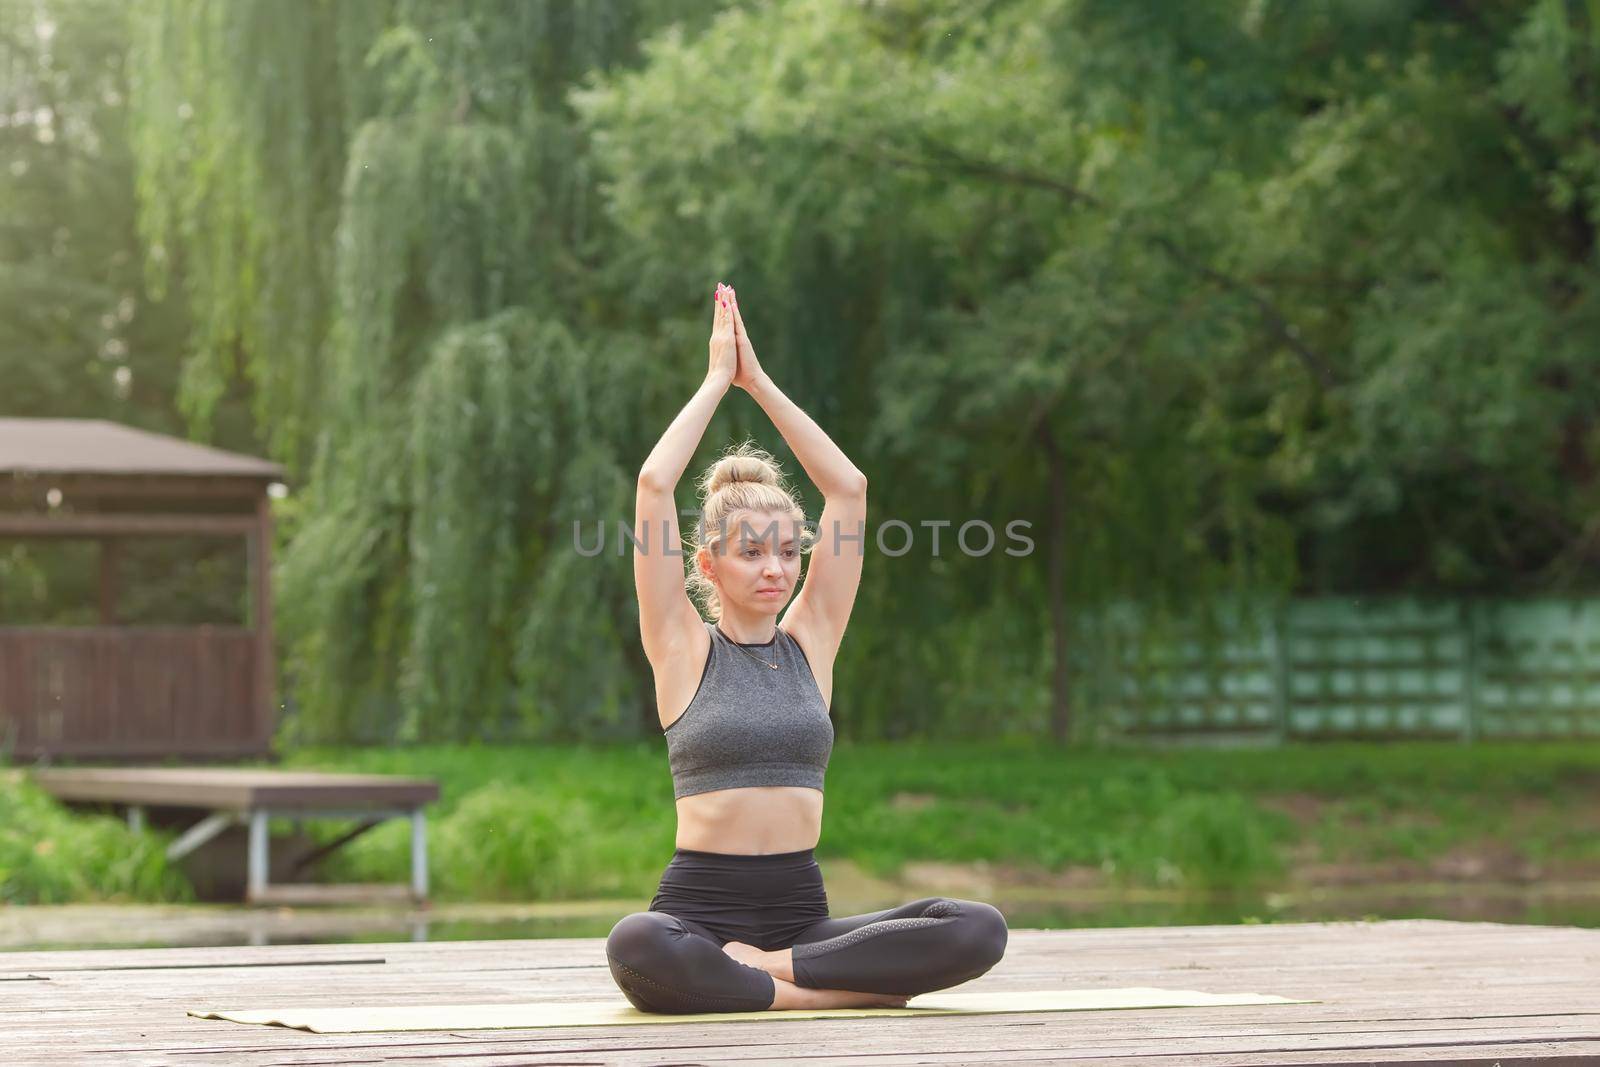 A slender woman in a gray top and leggings, sitting on a wooden platform by a pond in the park in summer, does yoga with her closed palms raised above her head. Copy space